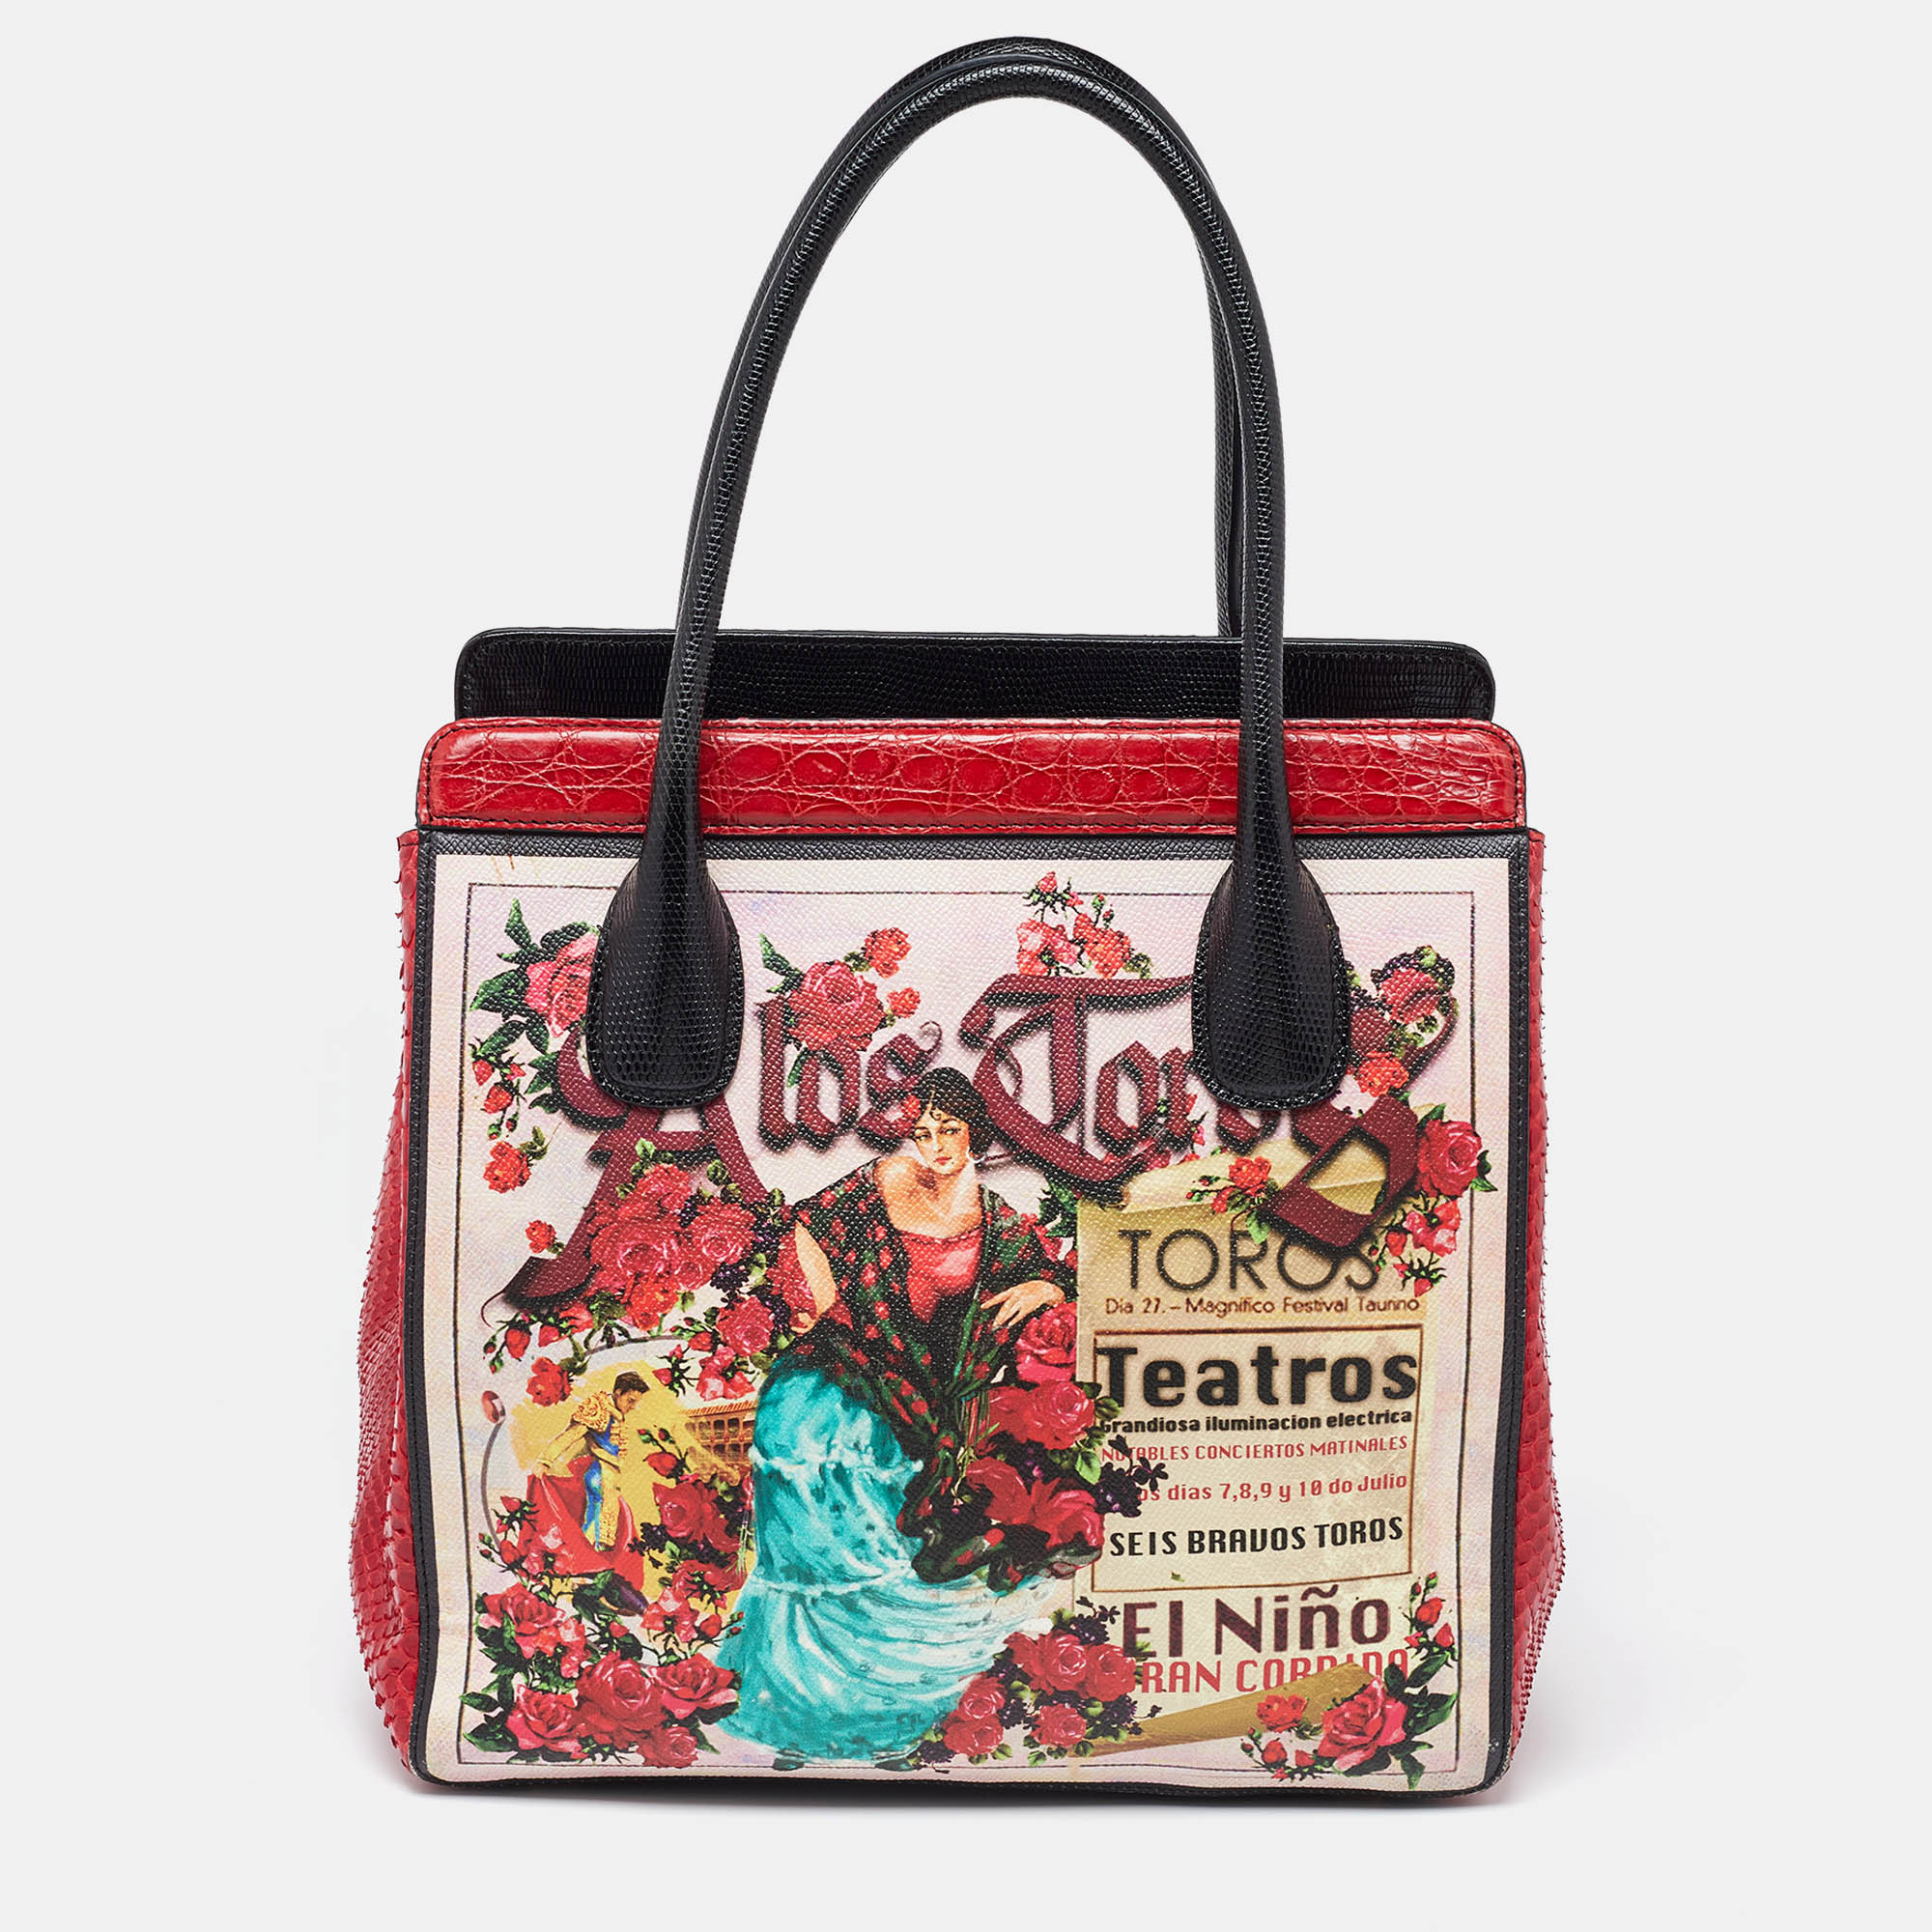 

Dolce & Gabbana Multicolor Python,Alligator and Leather A Los Toros Tote